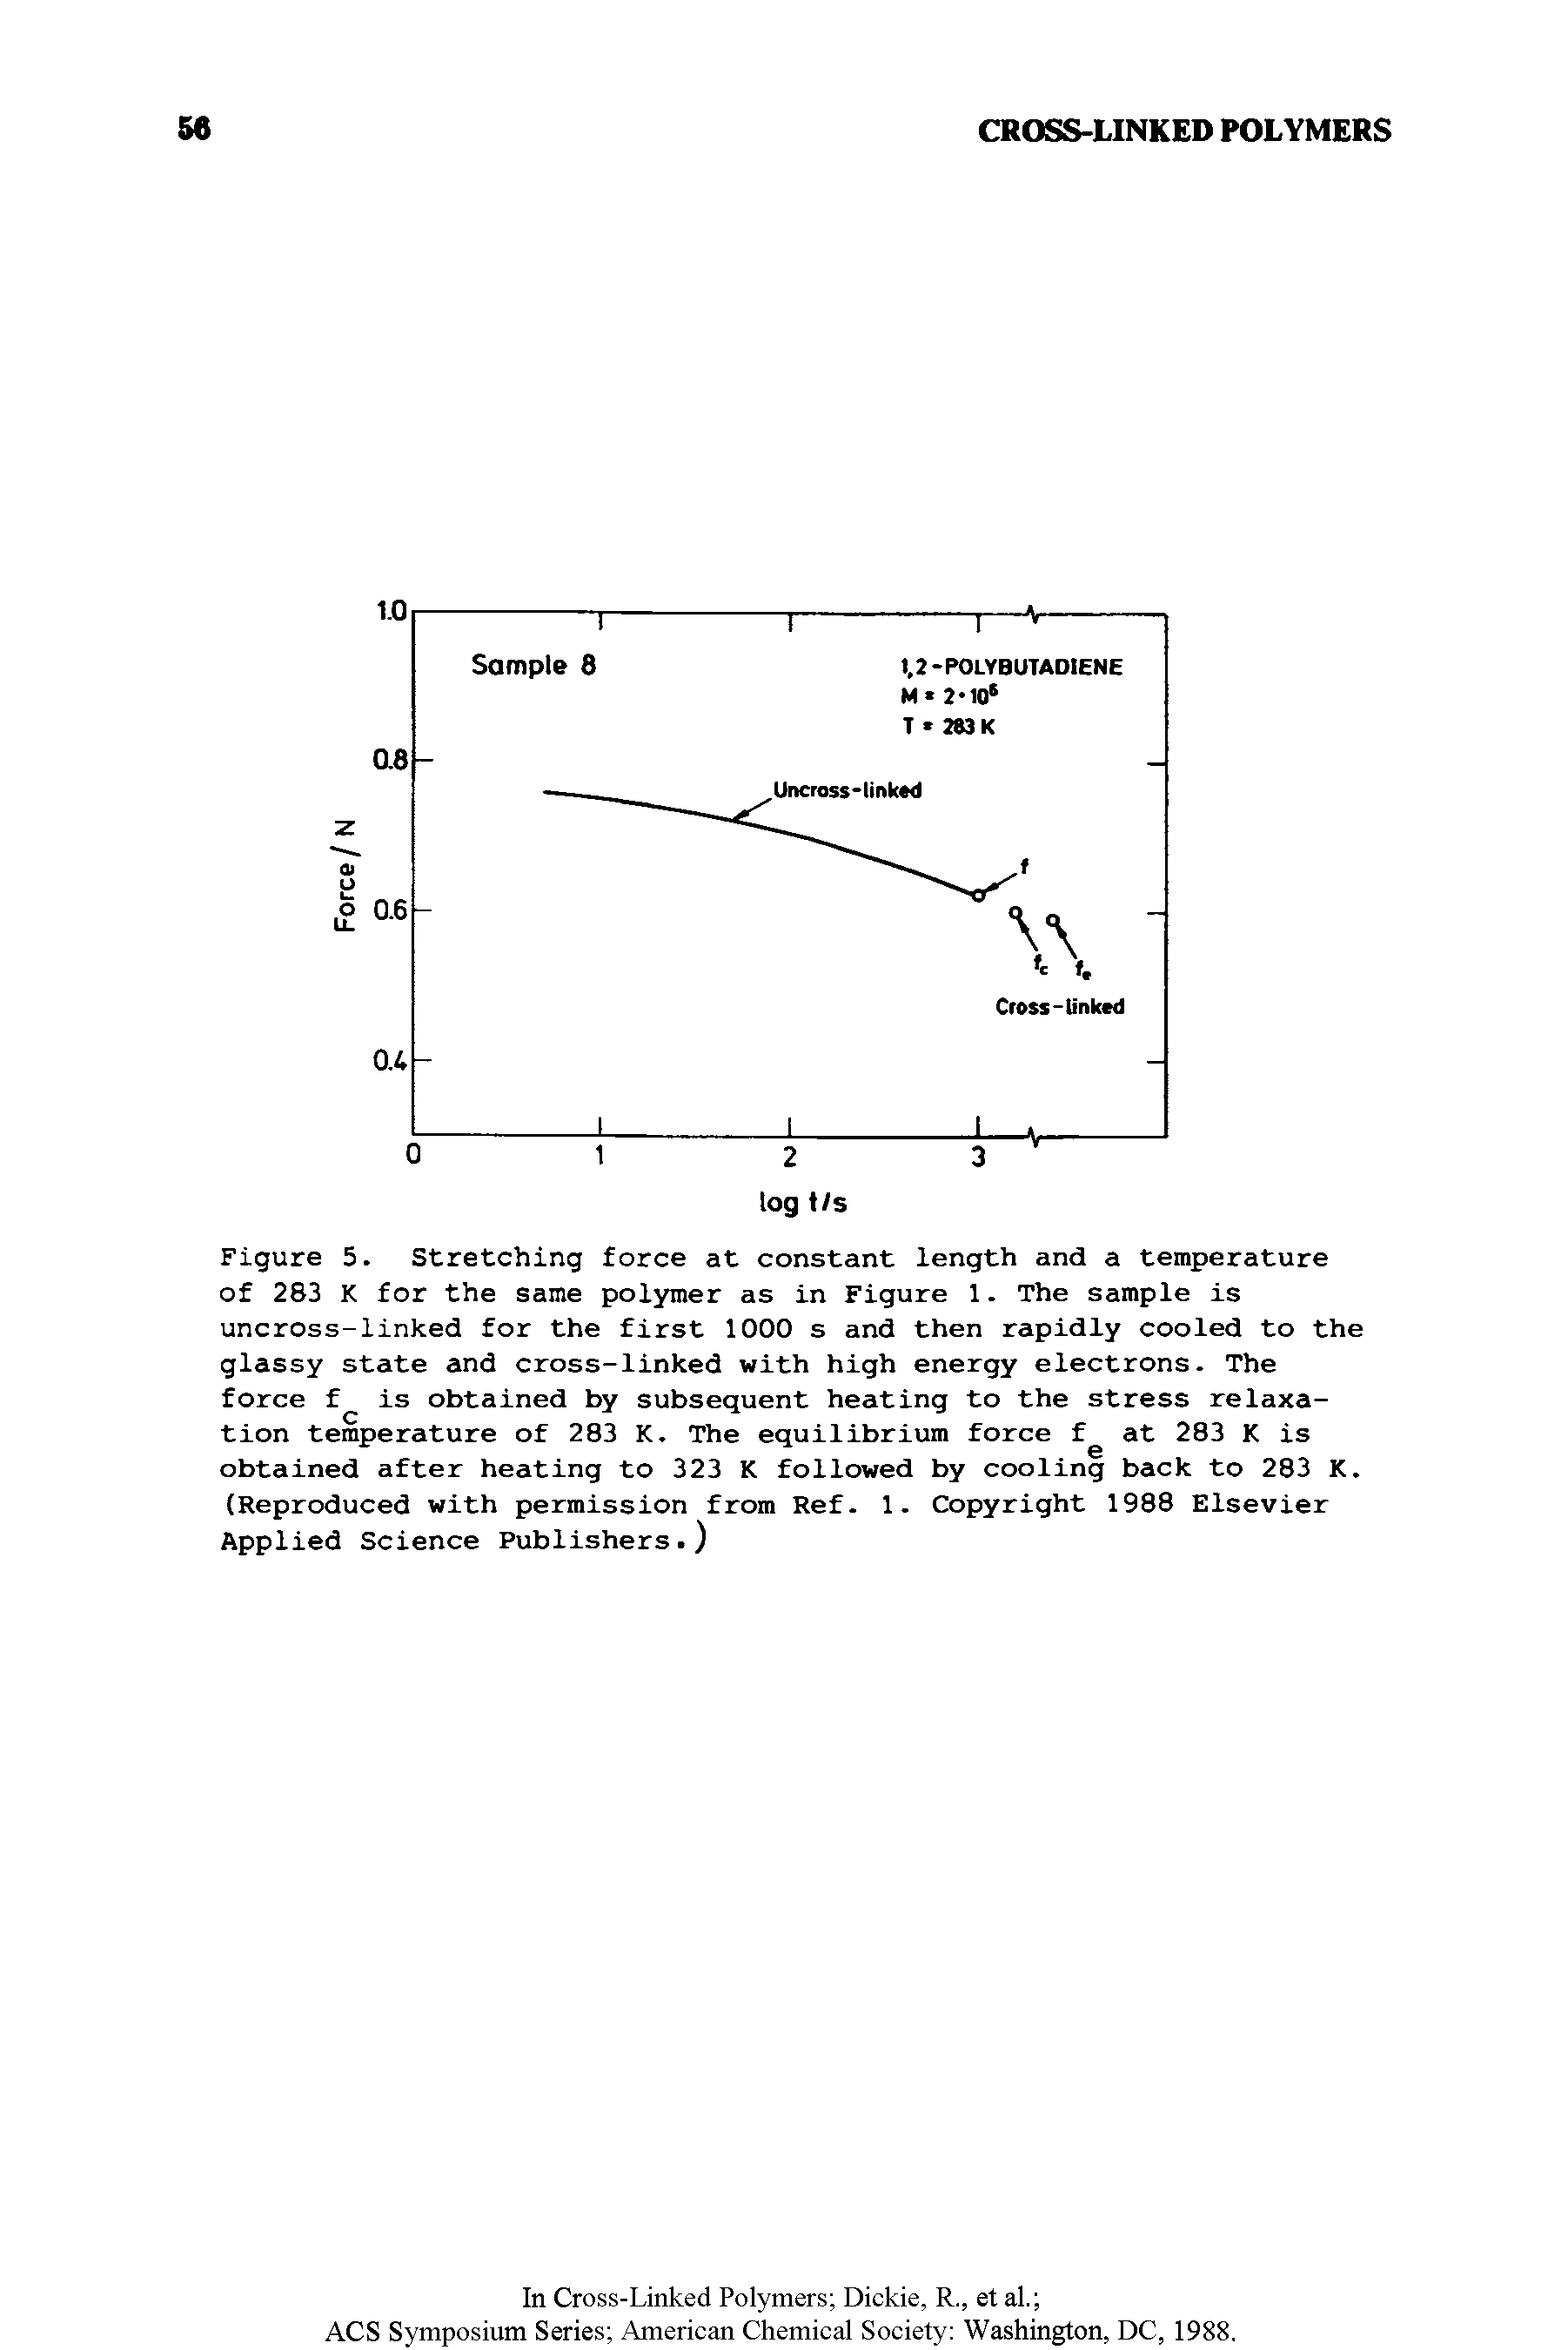 Figure 5. Stretching force at constant length and a temperature of 283 K for the same polymer as in Figure 1. The sample is uncross-linked for the first 1000 s and then rapidly cooled to the glassy state and cross-linked with high energy electrons. The force f is obtained by subsequent heating to the stress relaxa-...